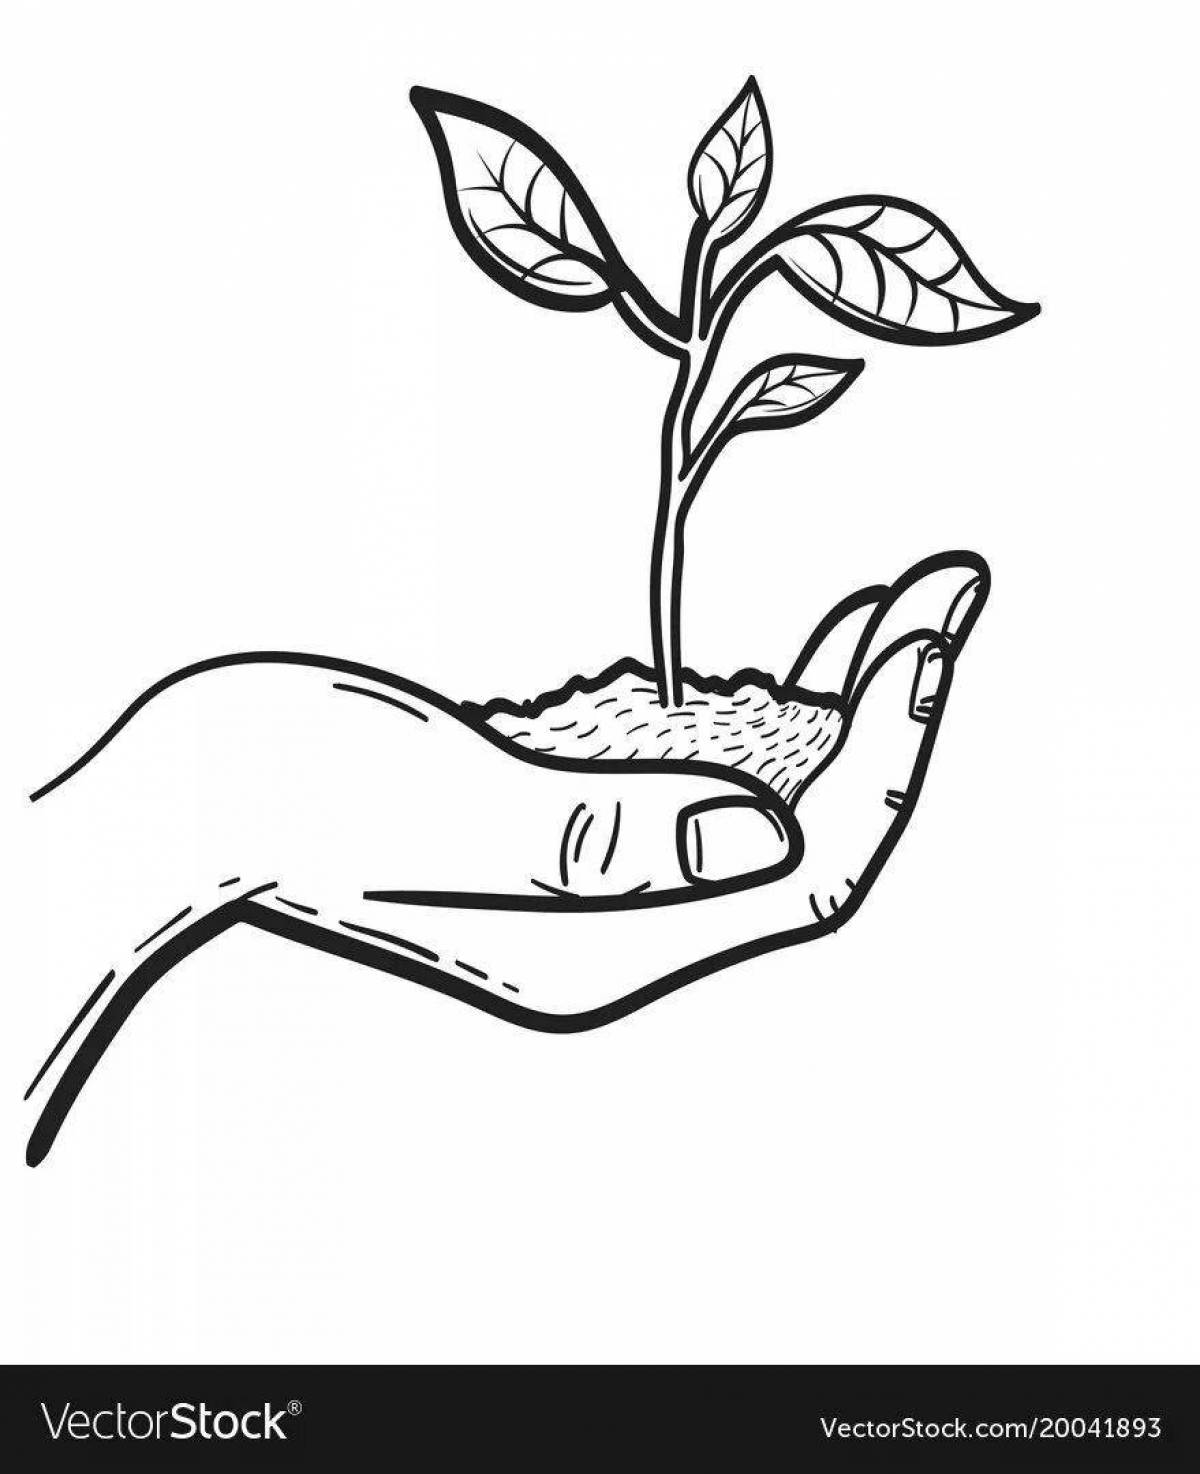 Coloring page live plant care